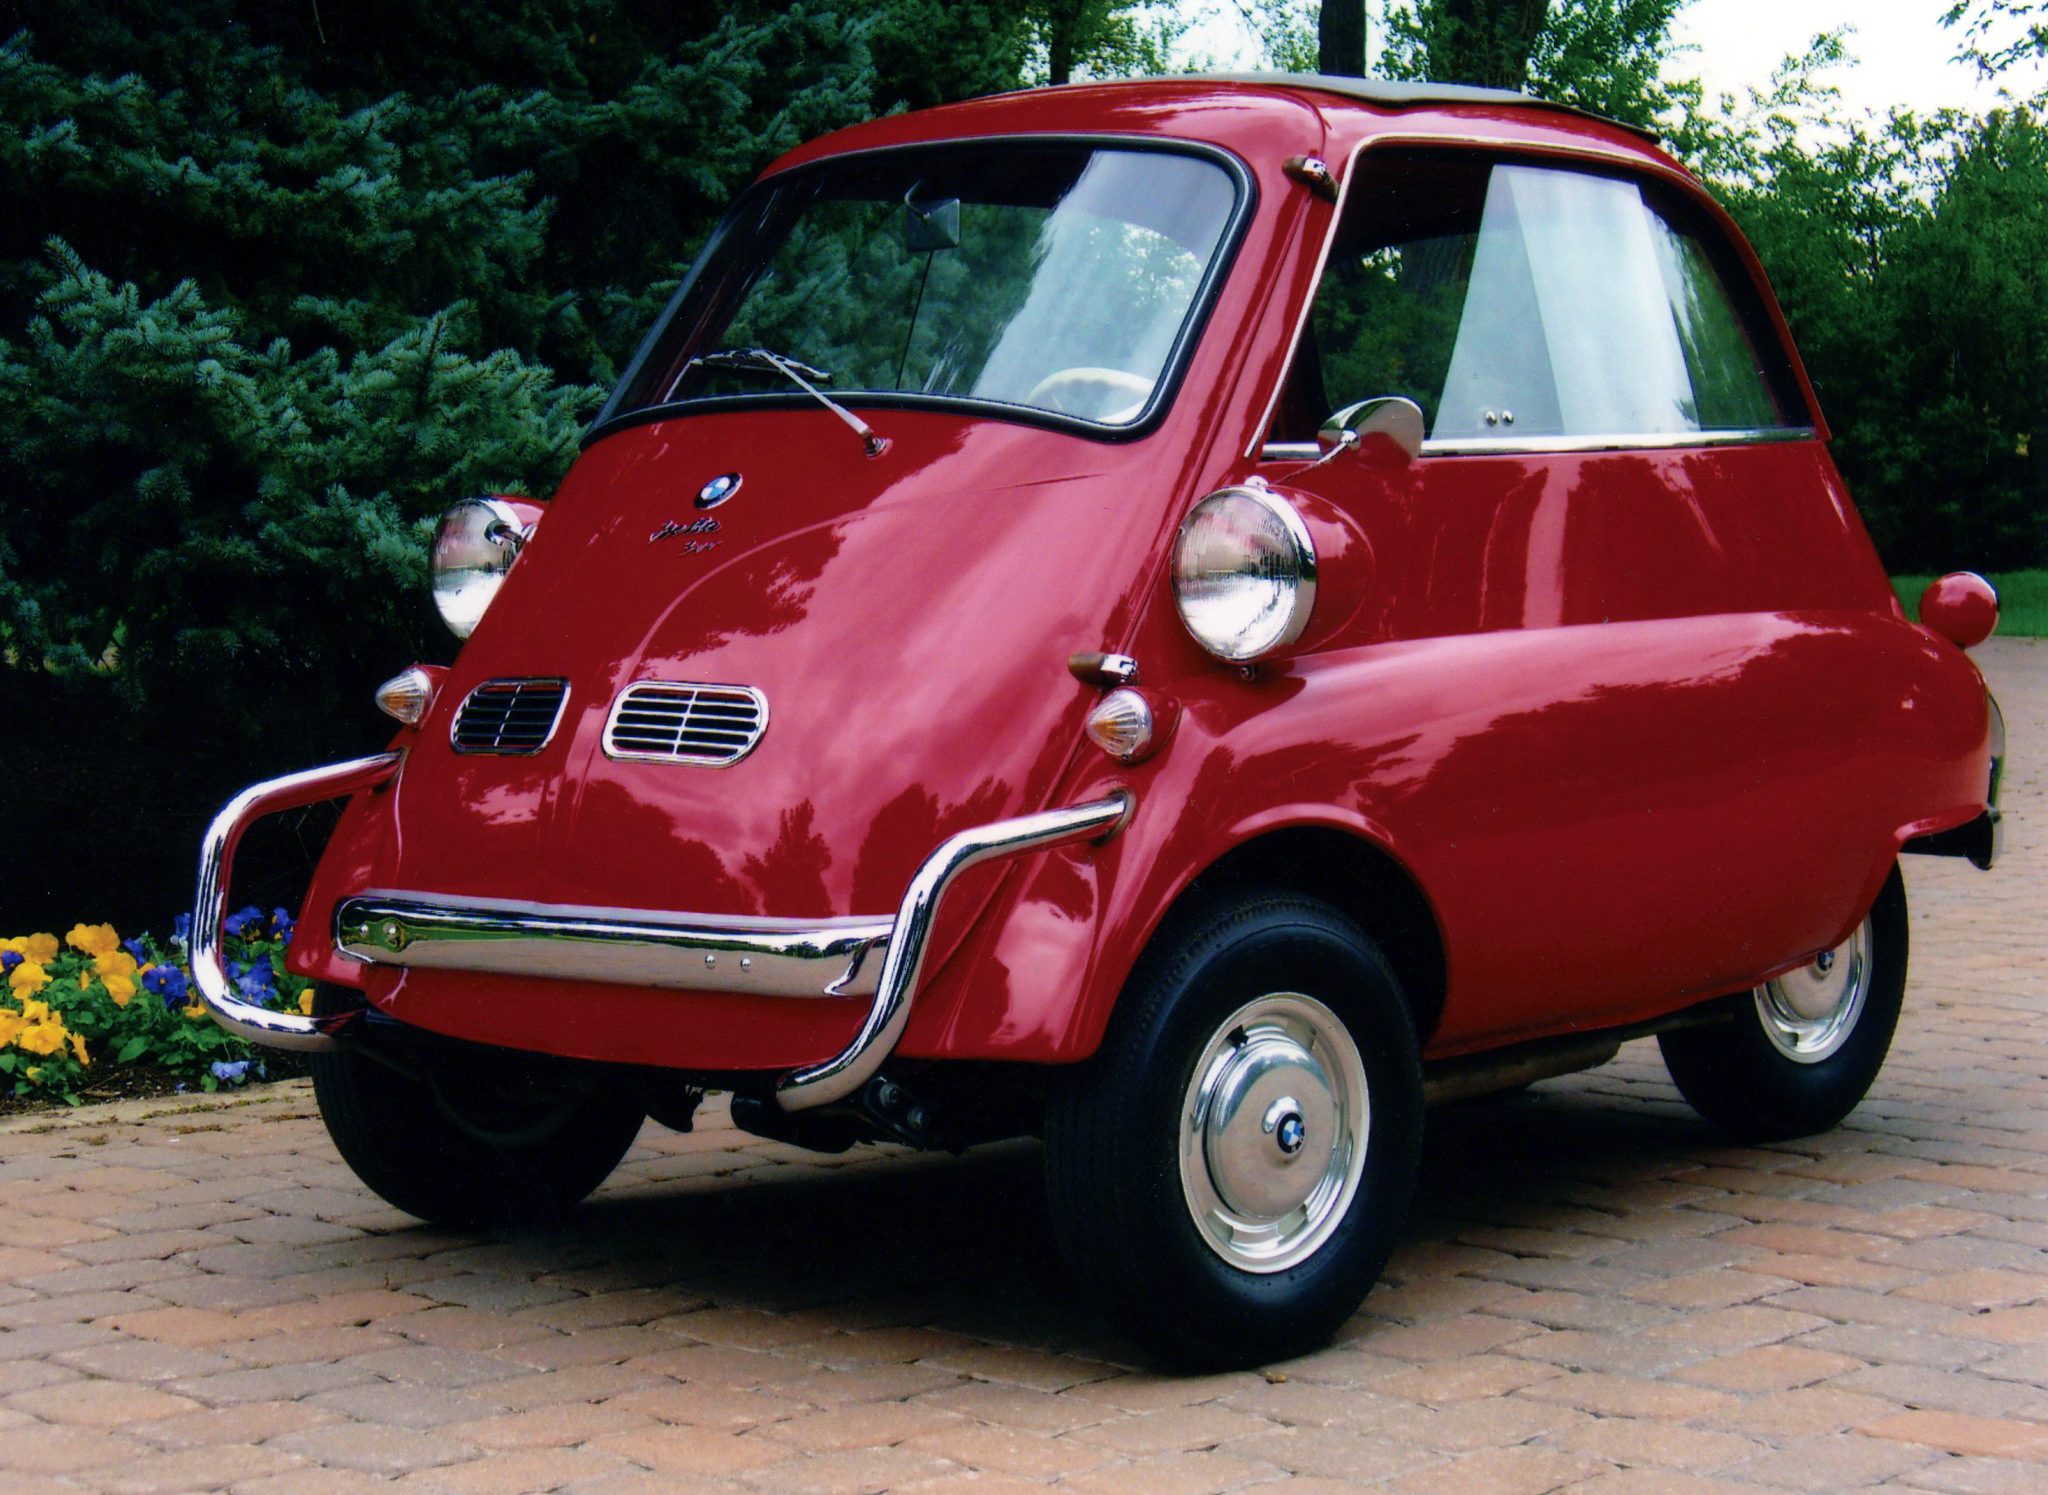 1953 BMW Isetta Wallpapers | SuperCars.net - Today's ...